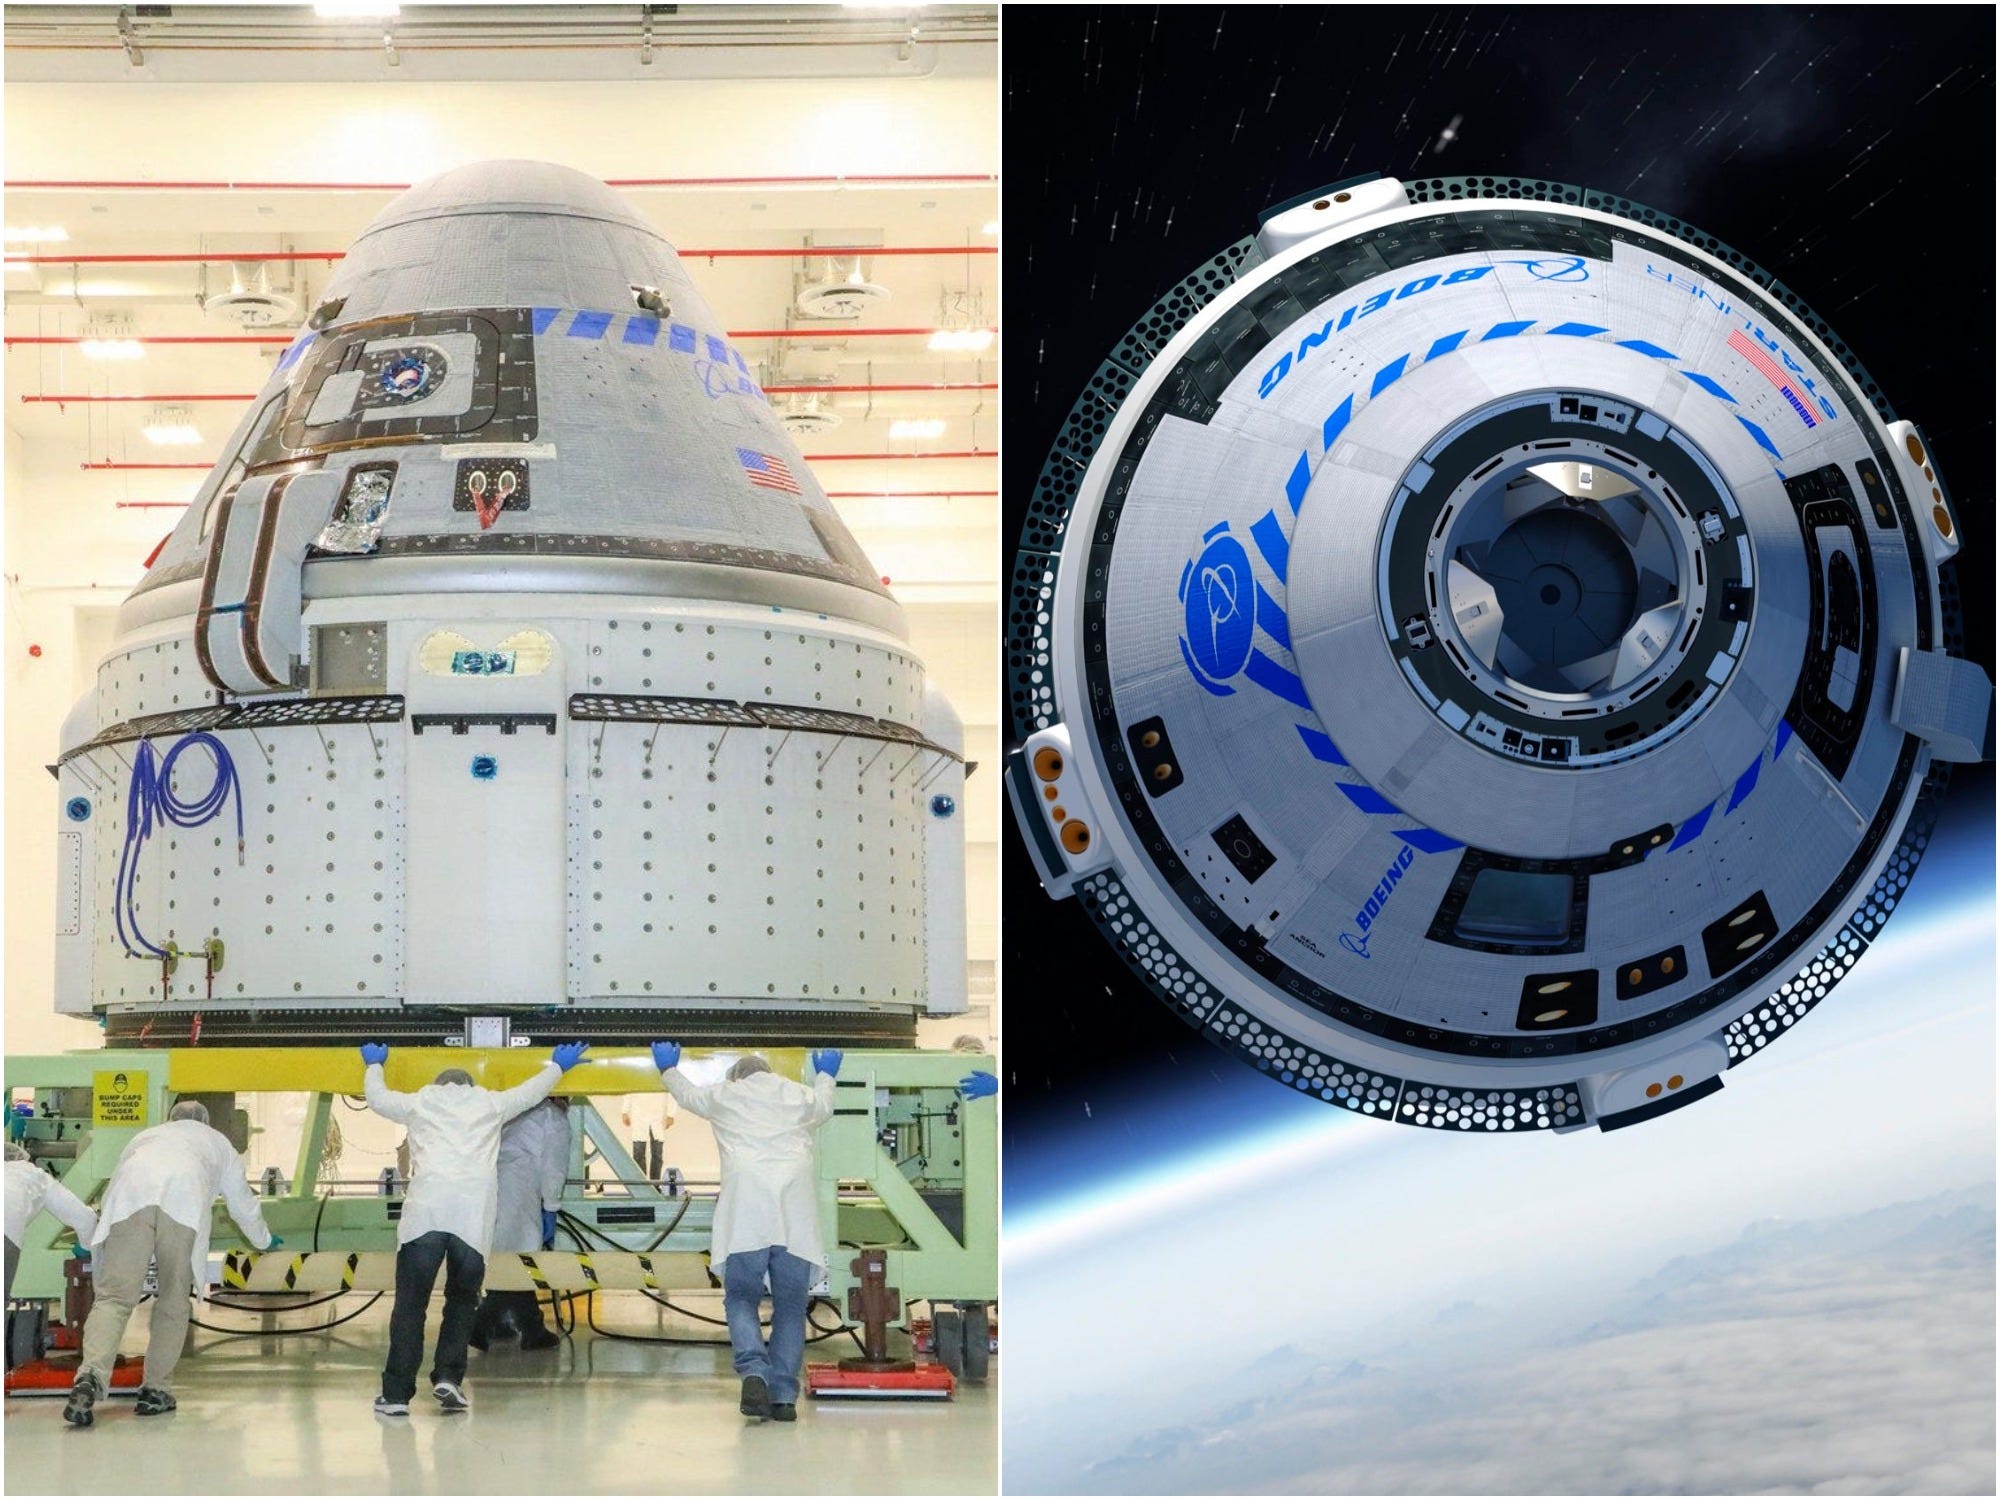 side by side image engineers roll boeing starliner spaceship into factory and illustration of starliner in space